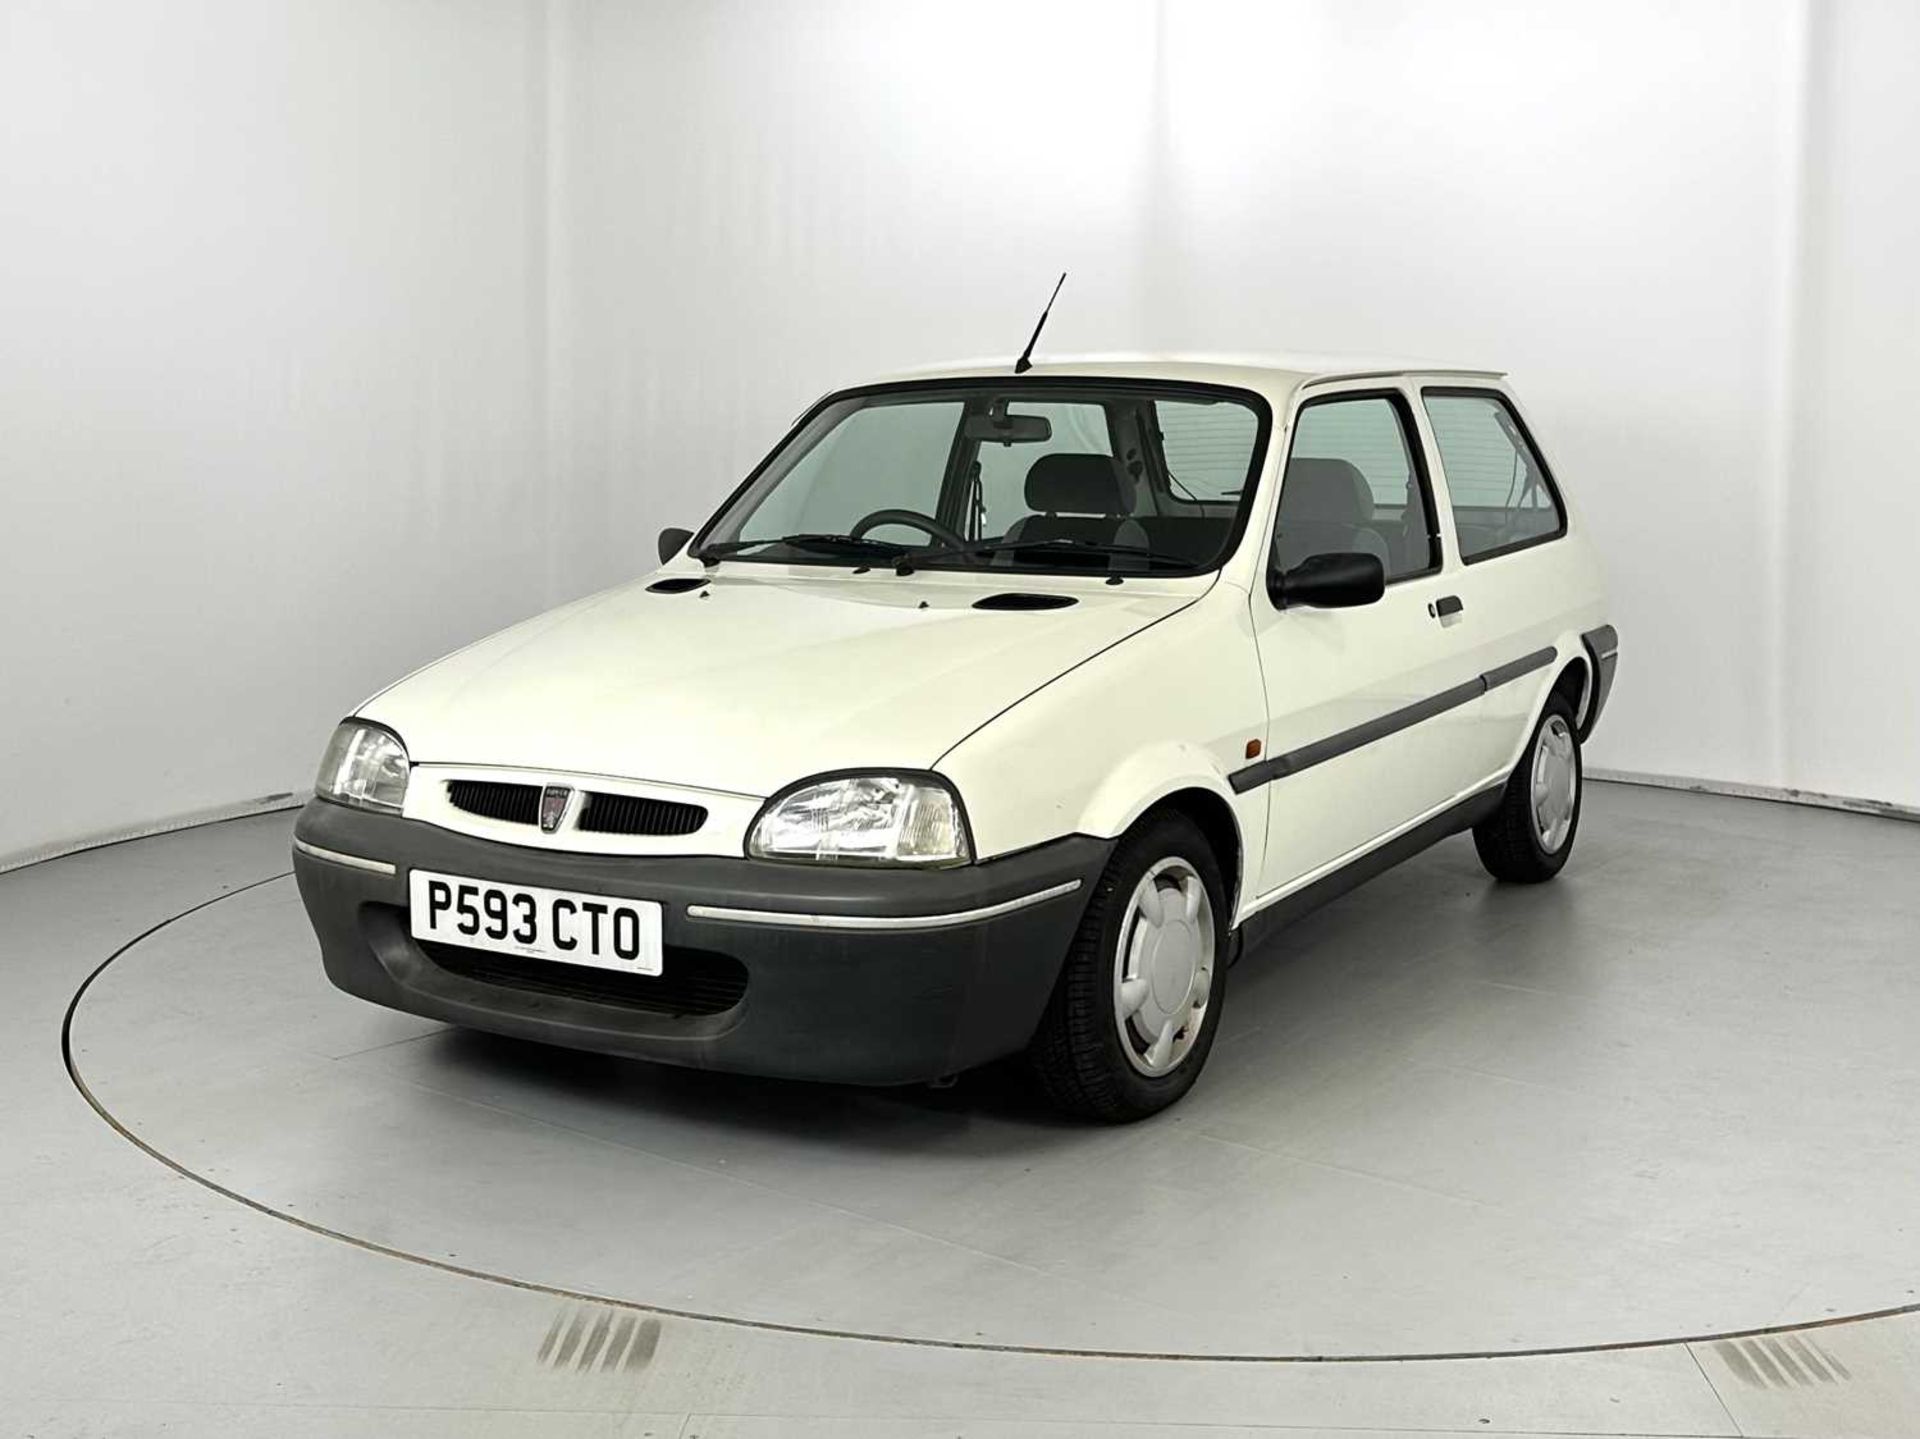 1996 Rover Metro - NO RESERVE 13,000 miles! - Image 3 of 29